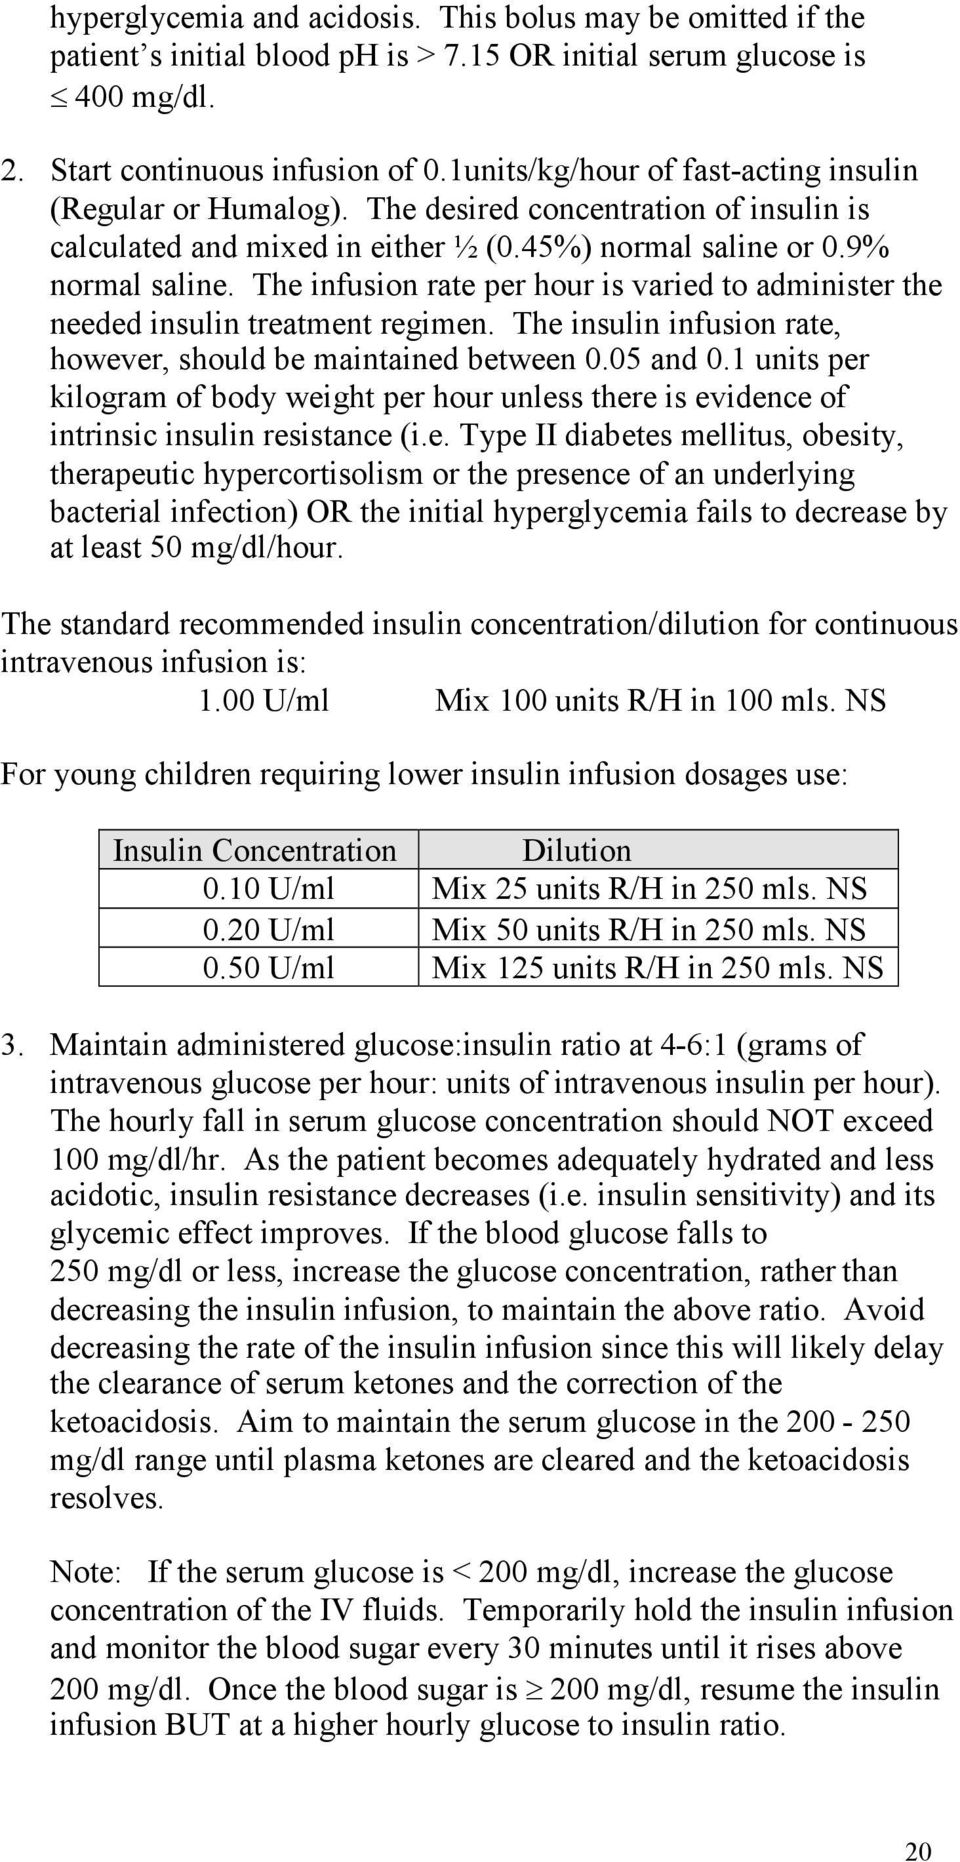 The infusion rate per hour is varied to administer the needed insulin treatment regimen. The insulin infusion rate, however, should be maintained between 0.05 and 0.